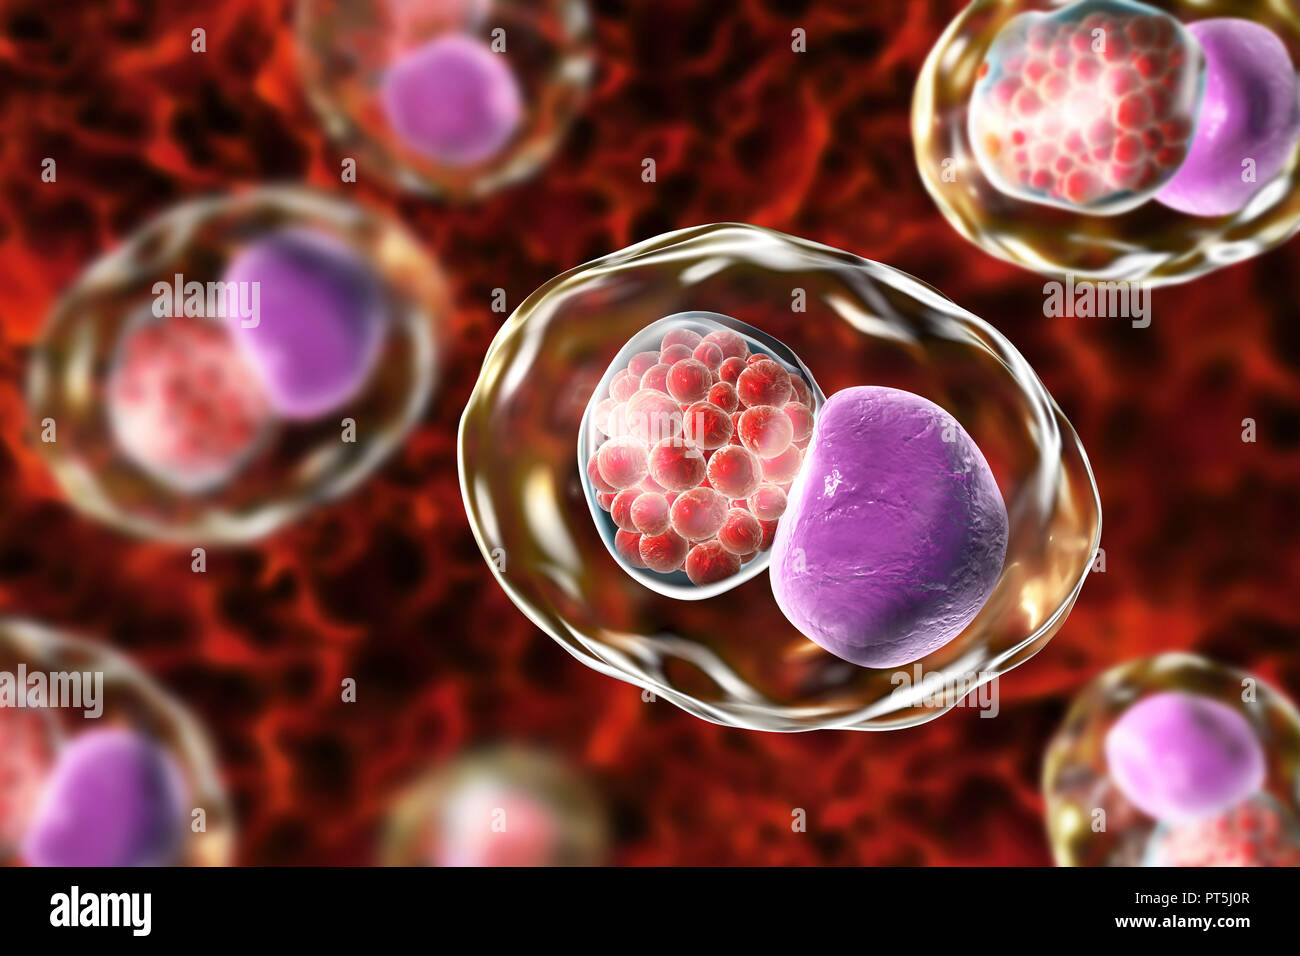 Chlamydia trachomatis bacteria. Computer illustration showing an inclusion composed of a group of chlamydia reticulate bodies (intracellular multiplying stage, small red spheres) near the nucleus (purple) of a cell. Chlamydia trachomatis causes a sexually transmitted infection that can go undetected causing infertility. It also causes the eye disease trachoma, which can lead to blindness. Stock Photo